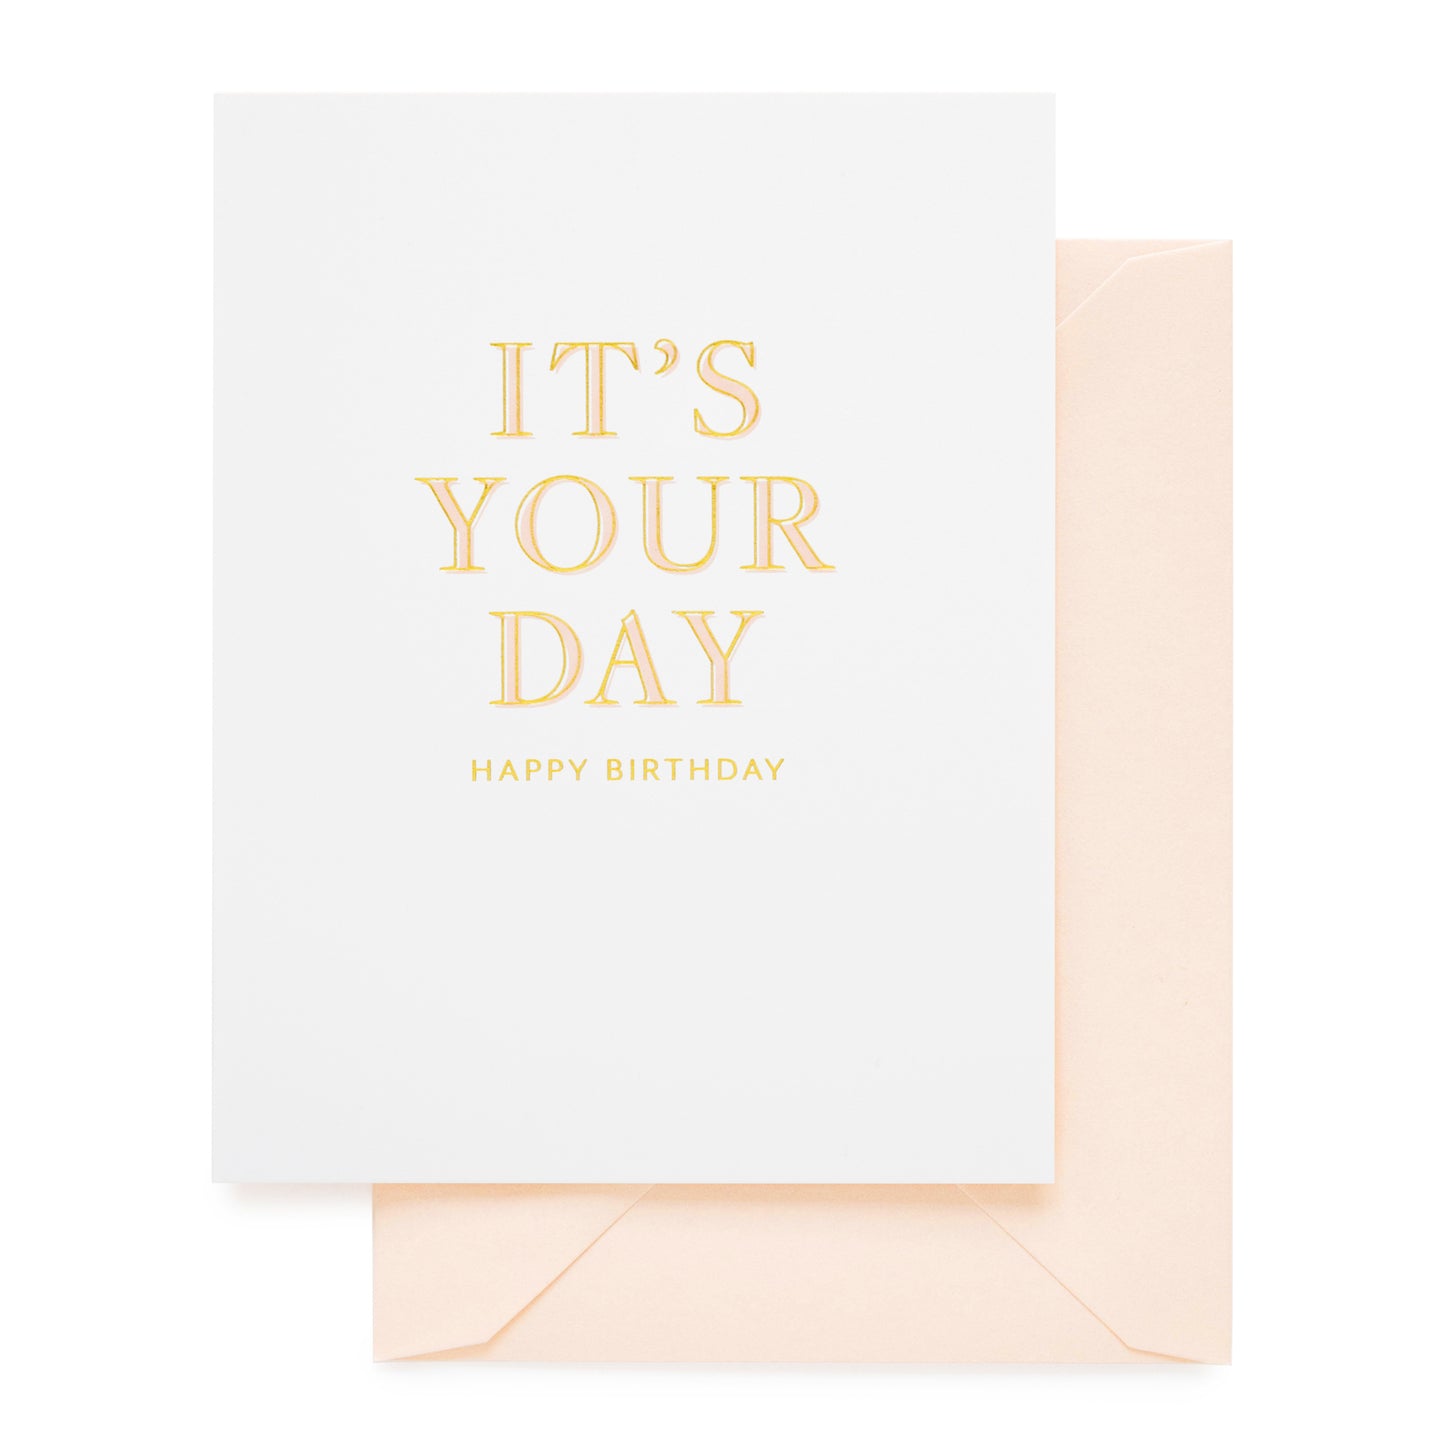 it's your day birthday card in pink and gold foil